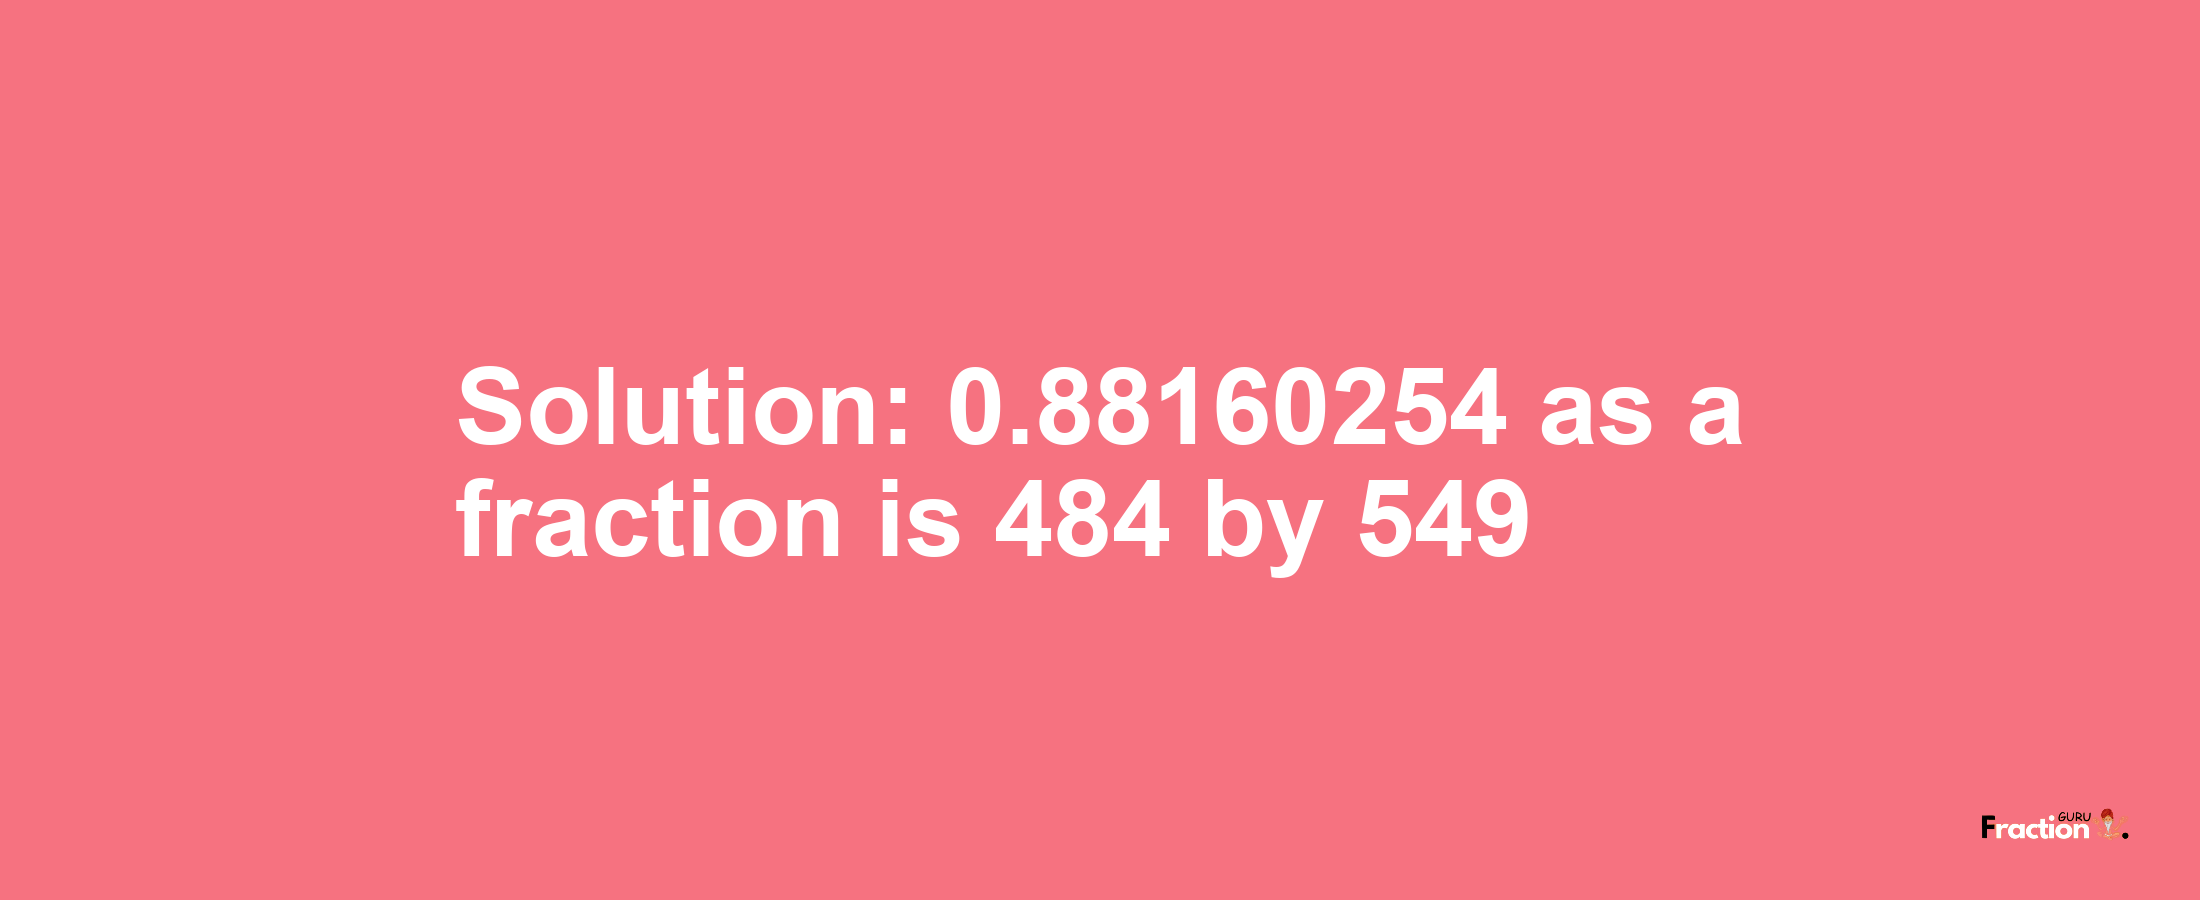 Solution:0.88160254 as a fraction is 484/549